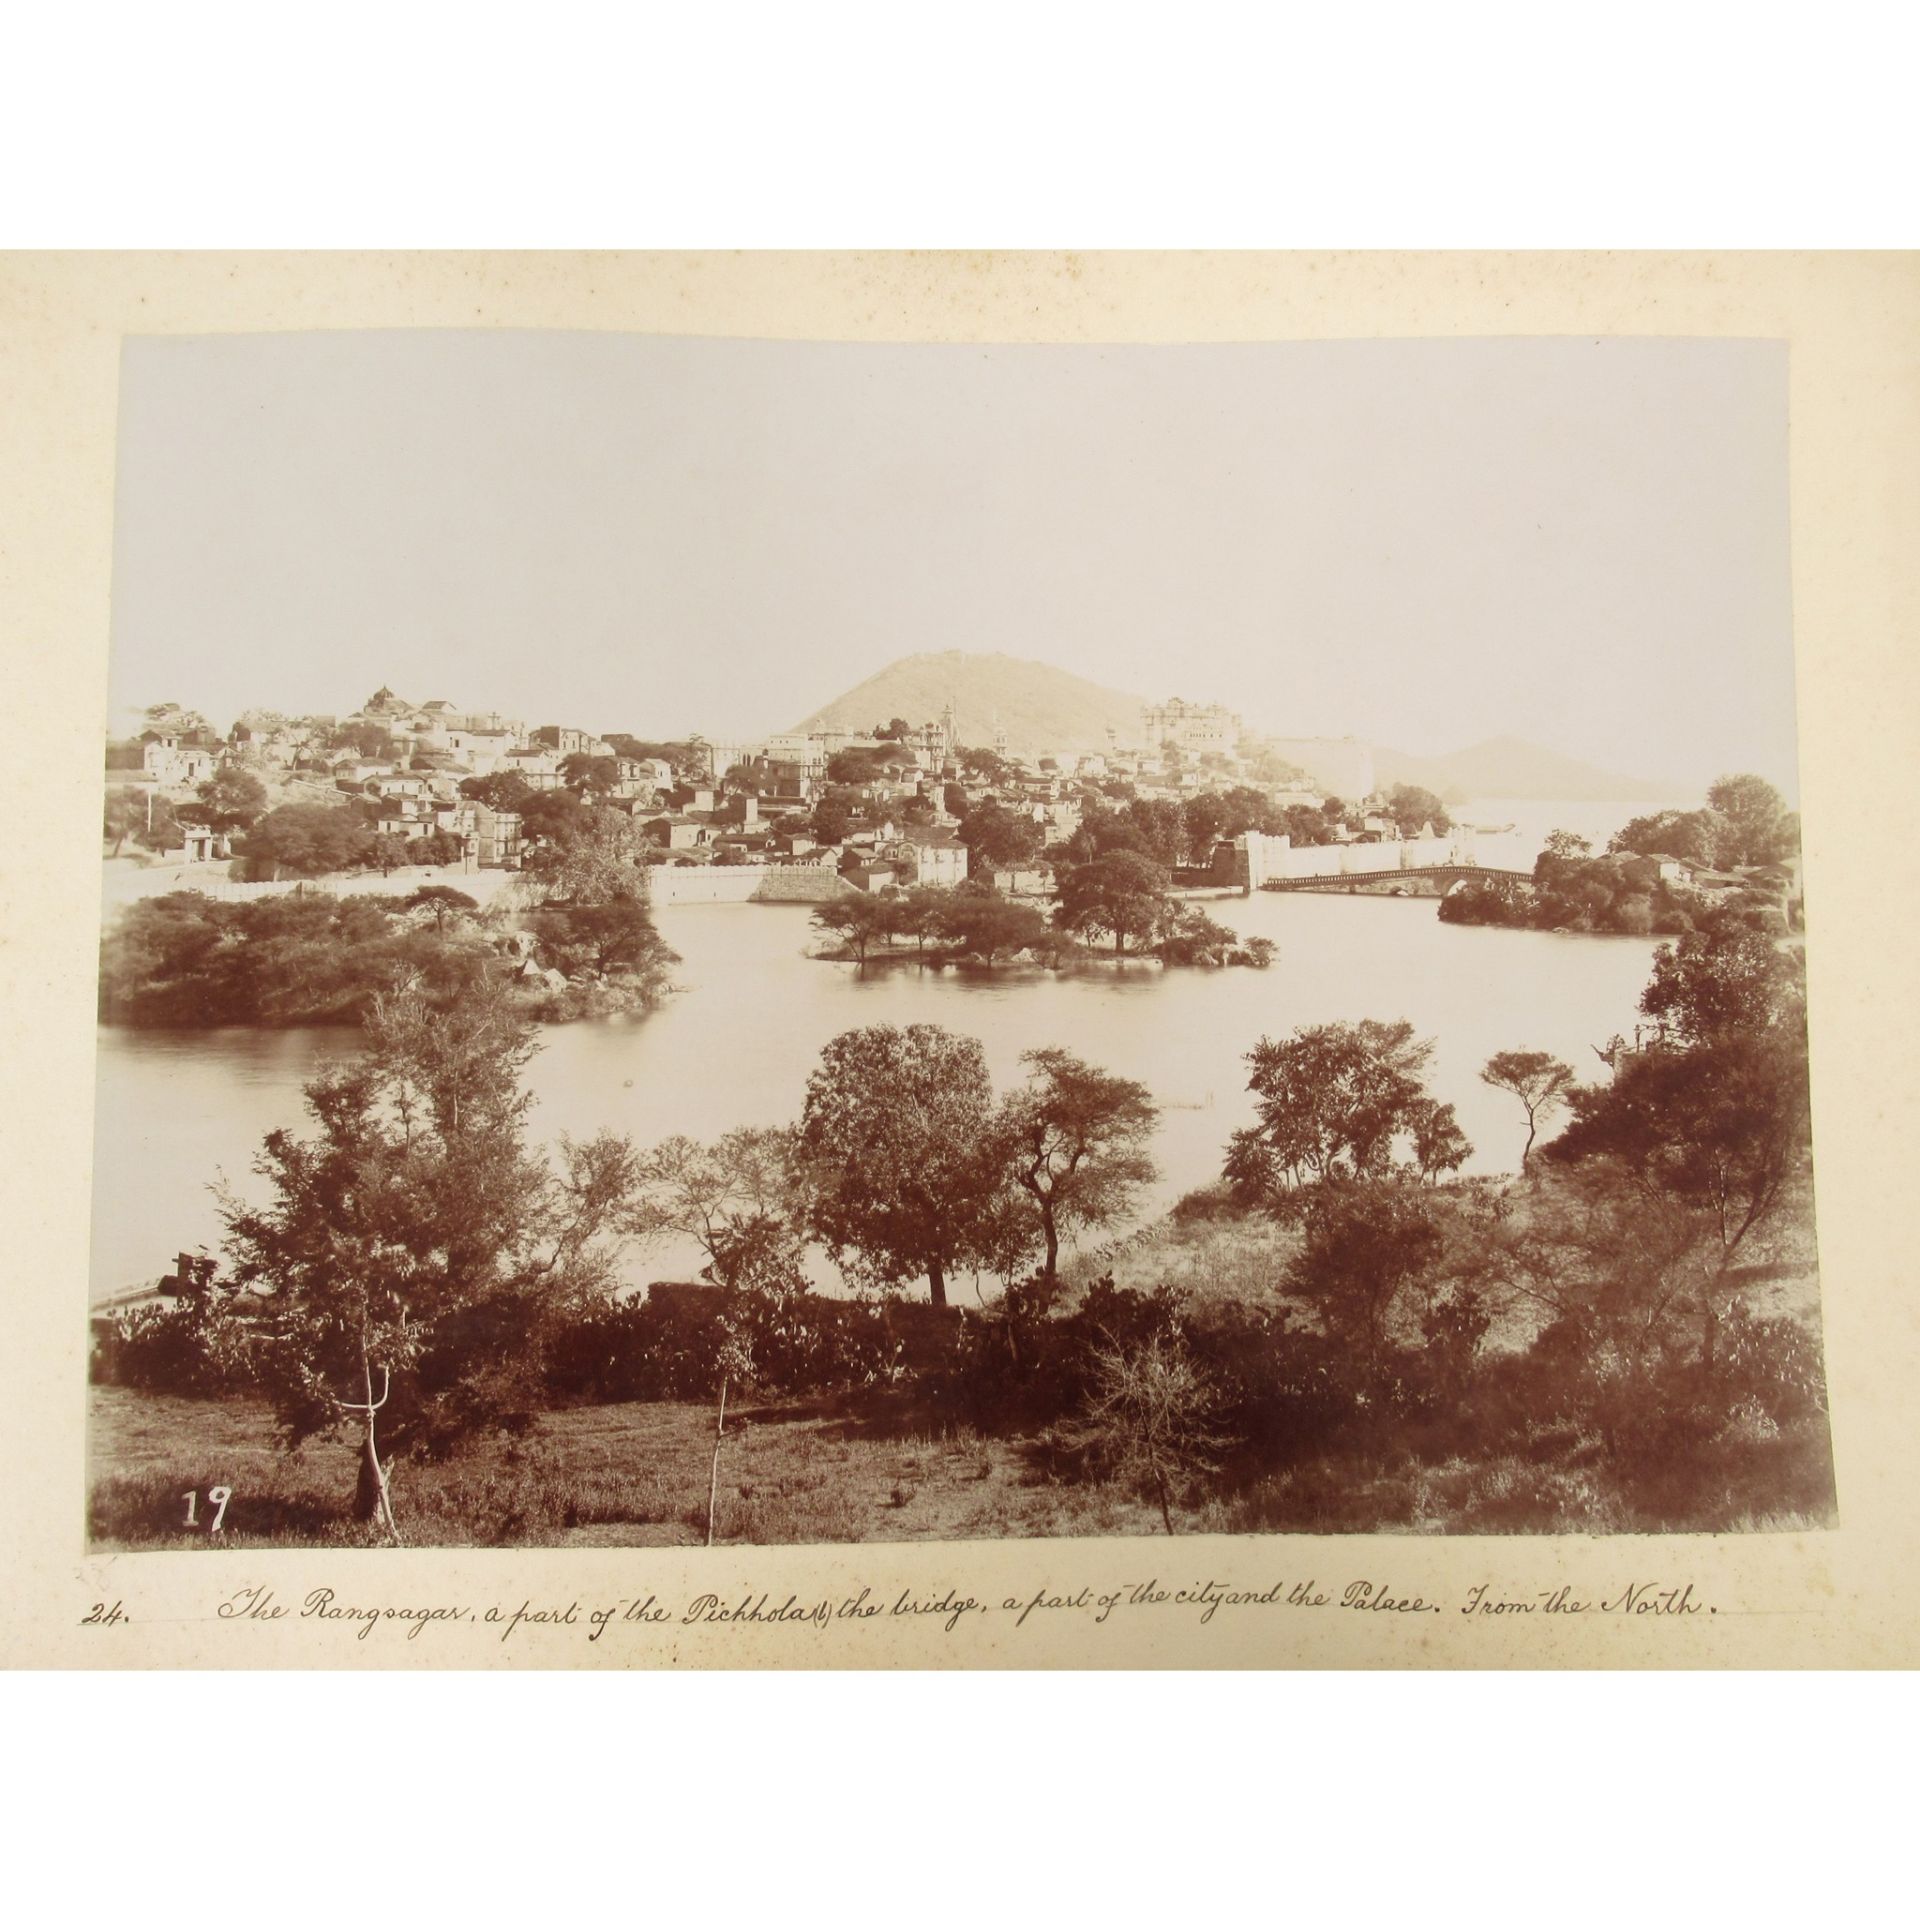 India: a photograph album Photographs of Rajasthan by Mohan Lal of Udaipur, late 19th century - Image 18 of 23